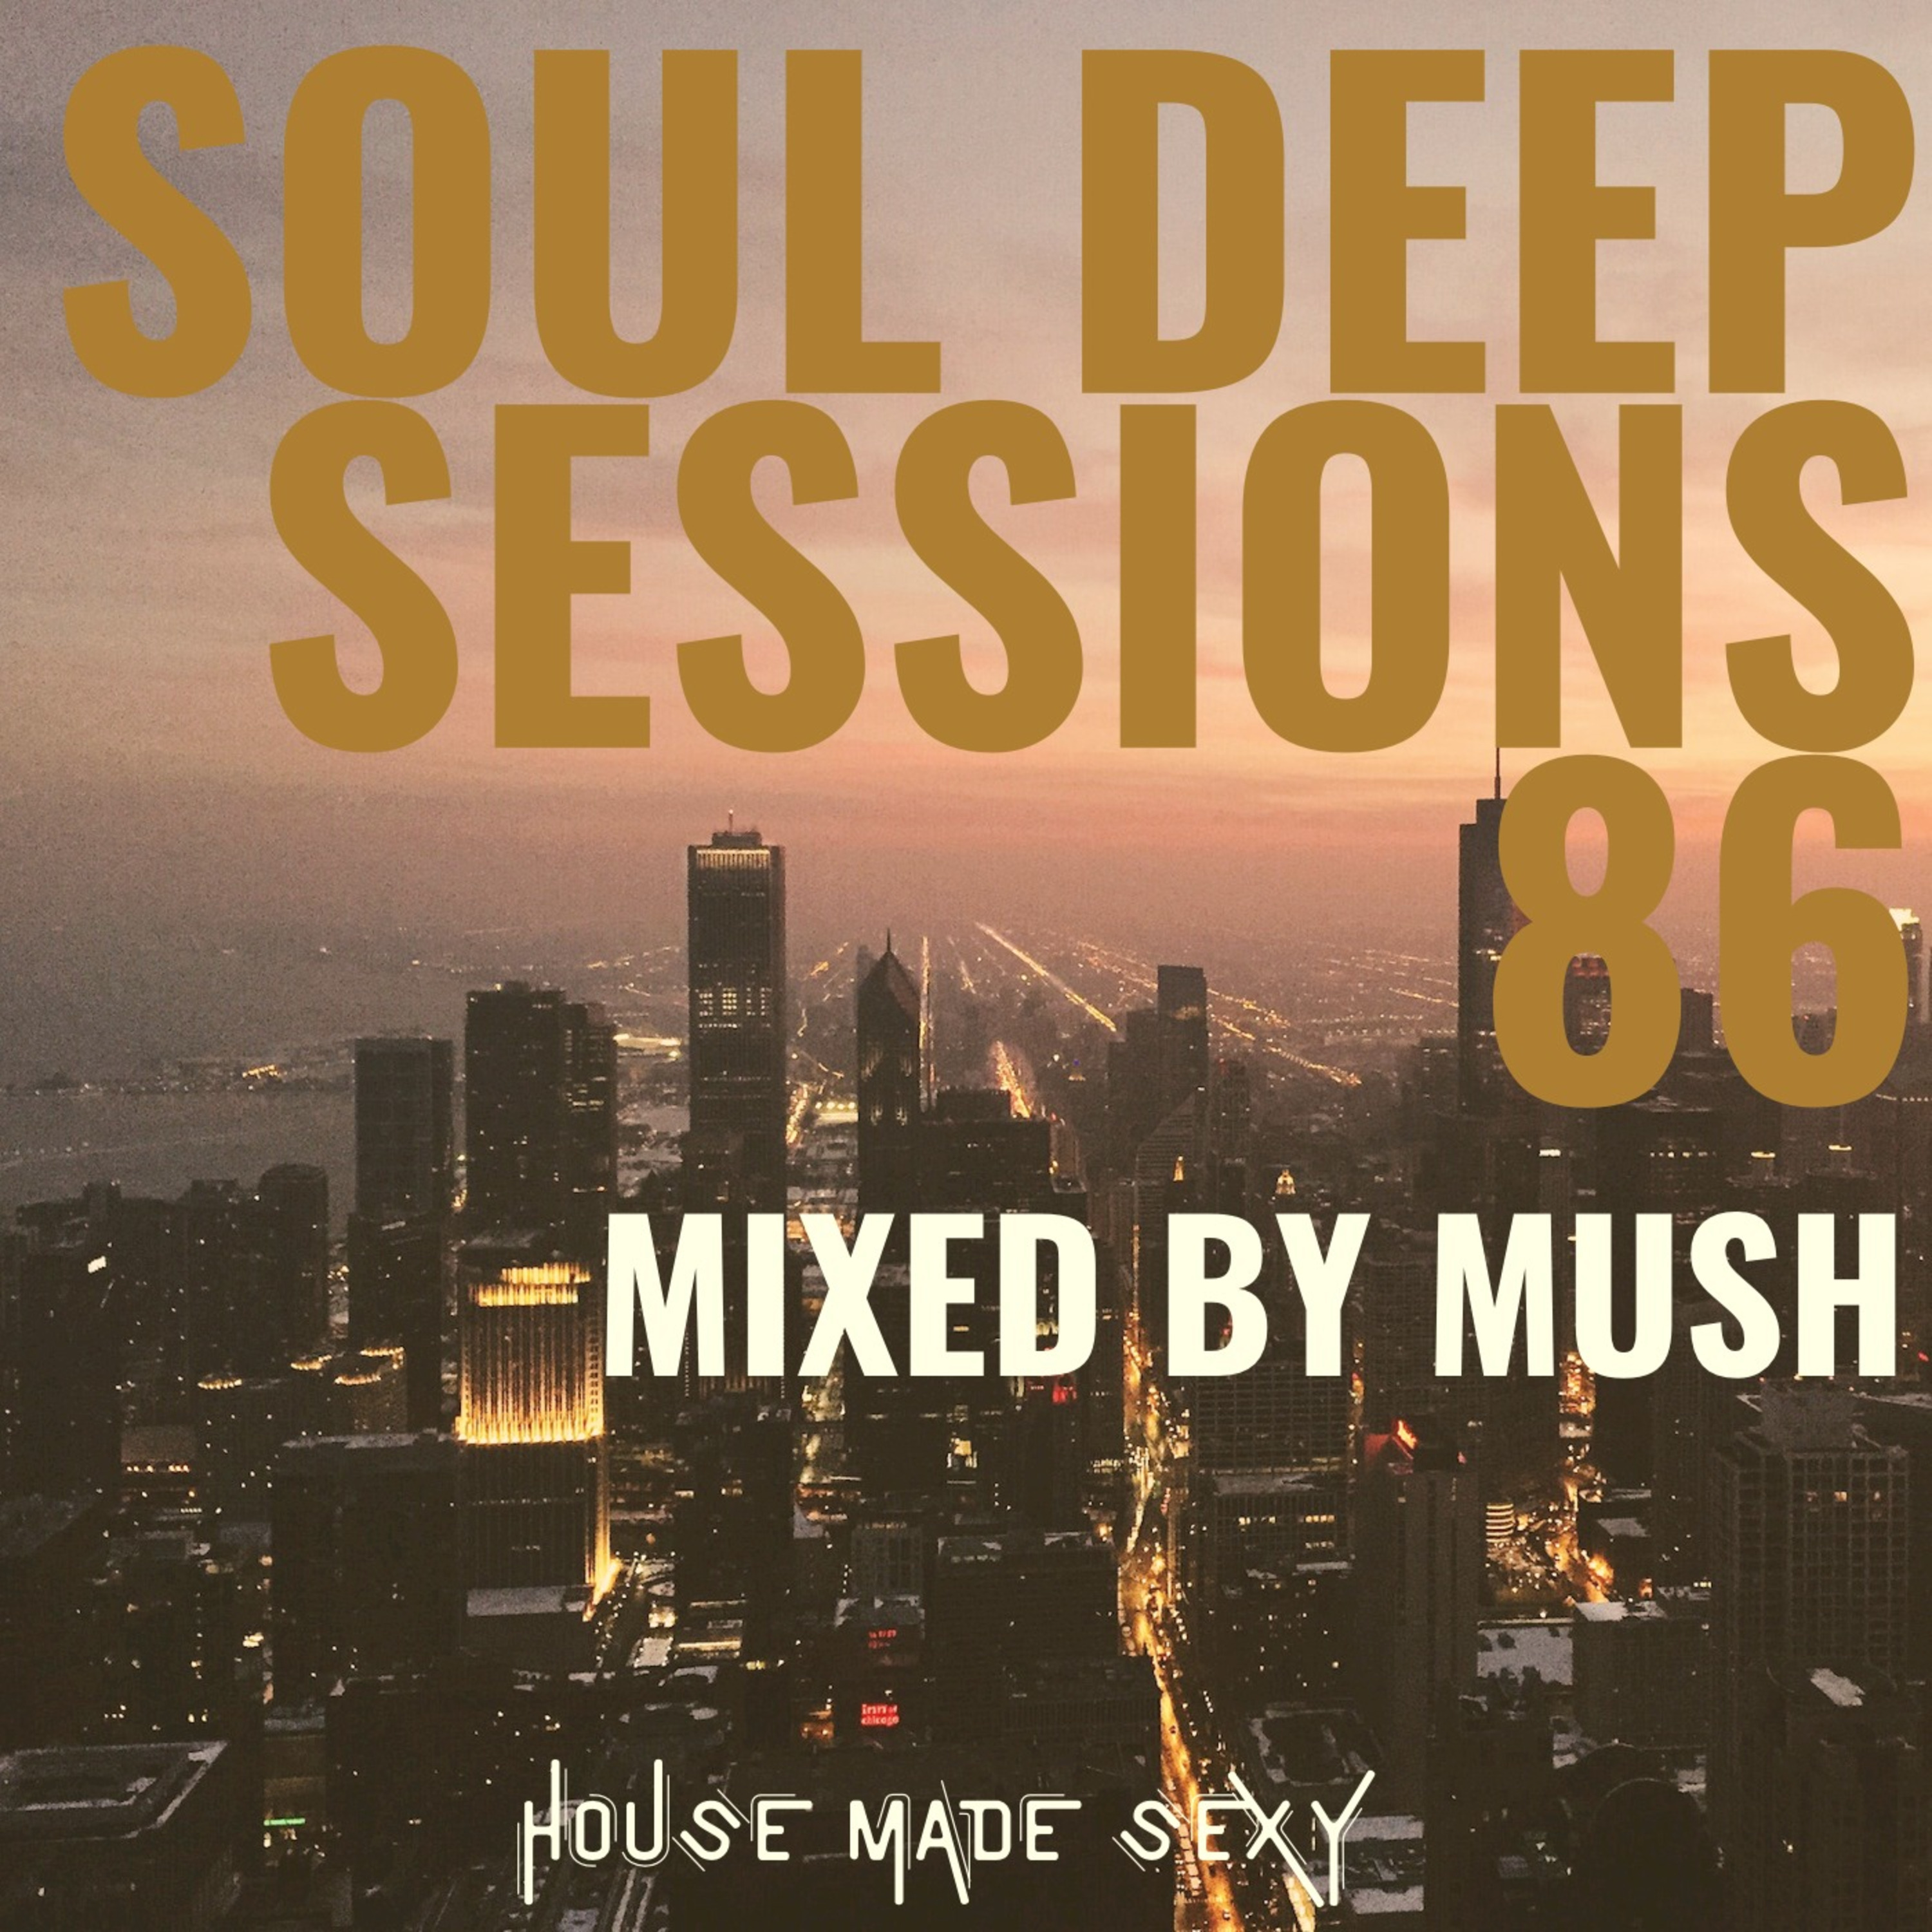 Black Podcasting - Episode 70: Soul Deep Sessions 86 mixed by Mush